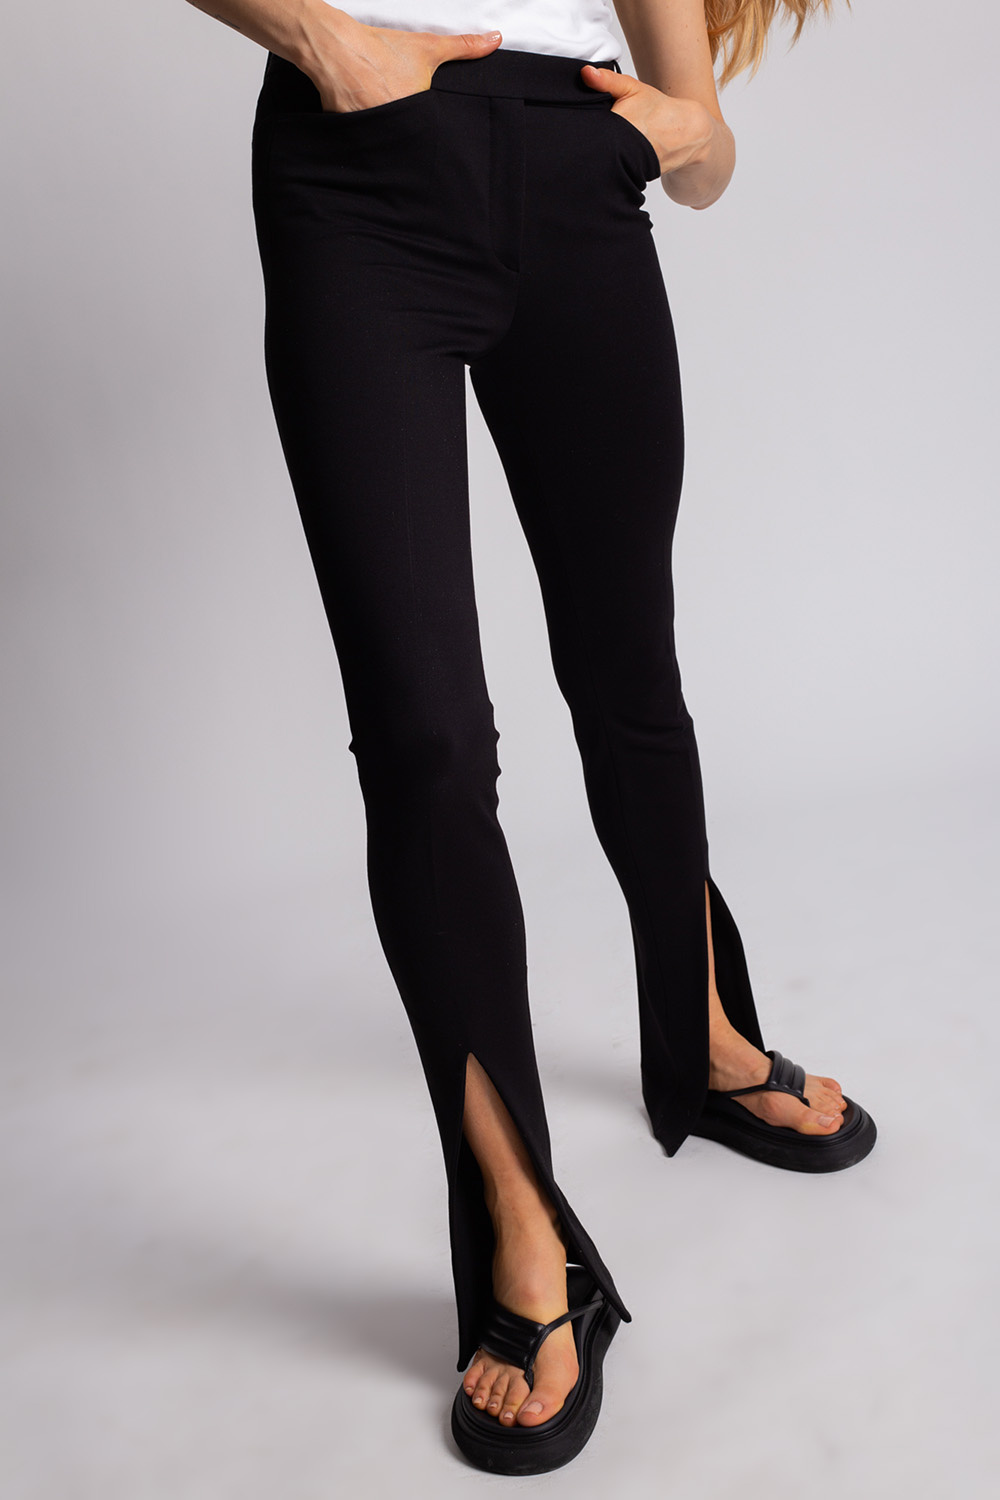 The Attico Pleat-front marques trousers